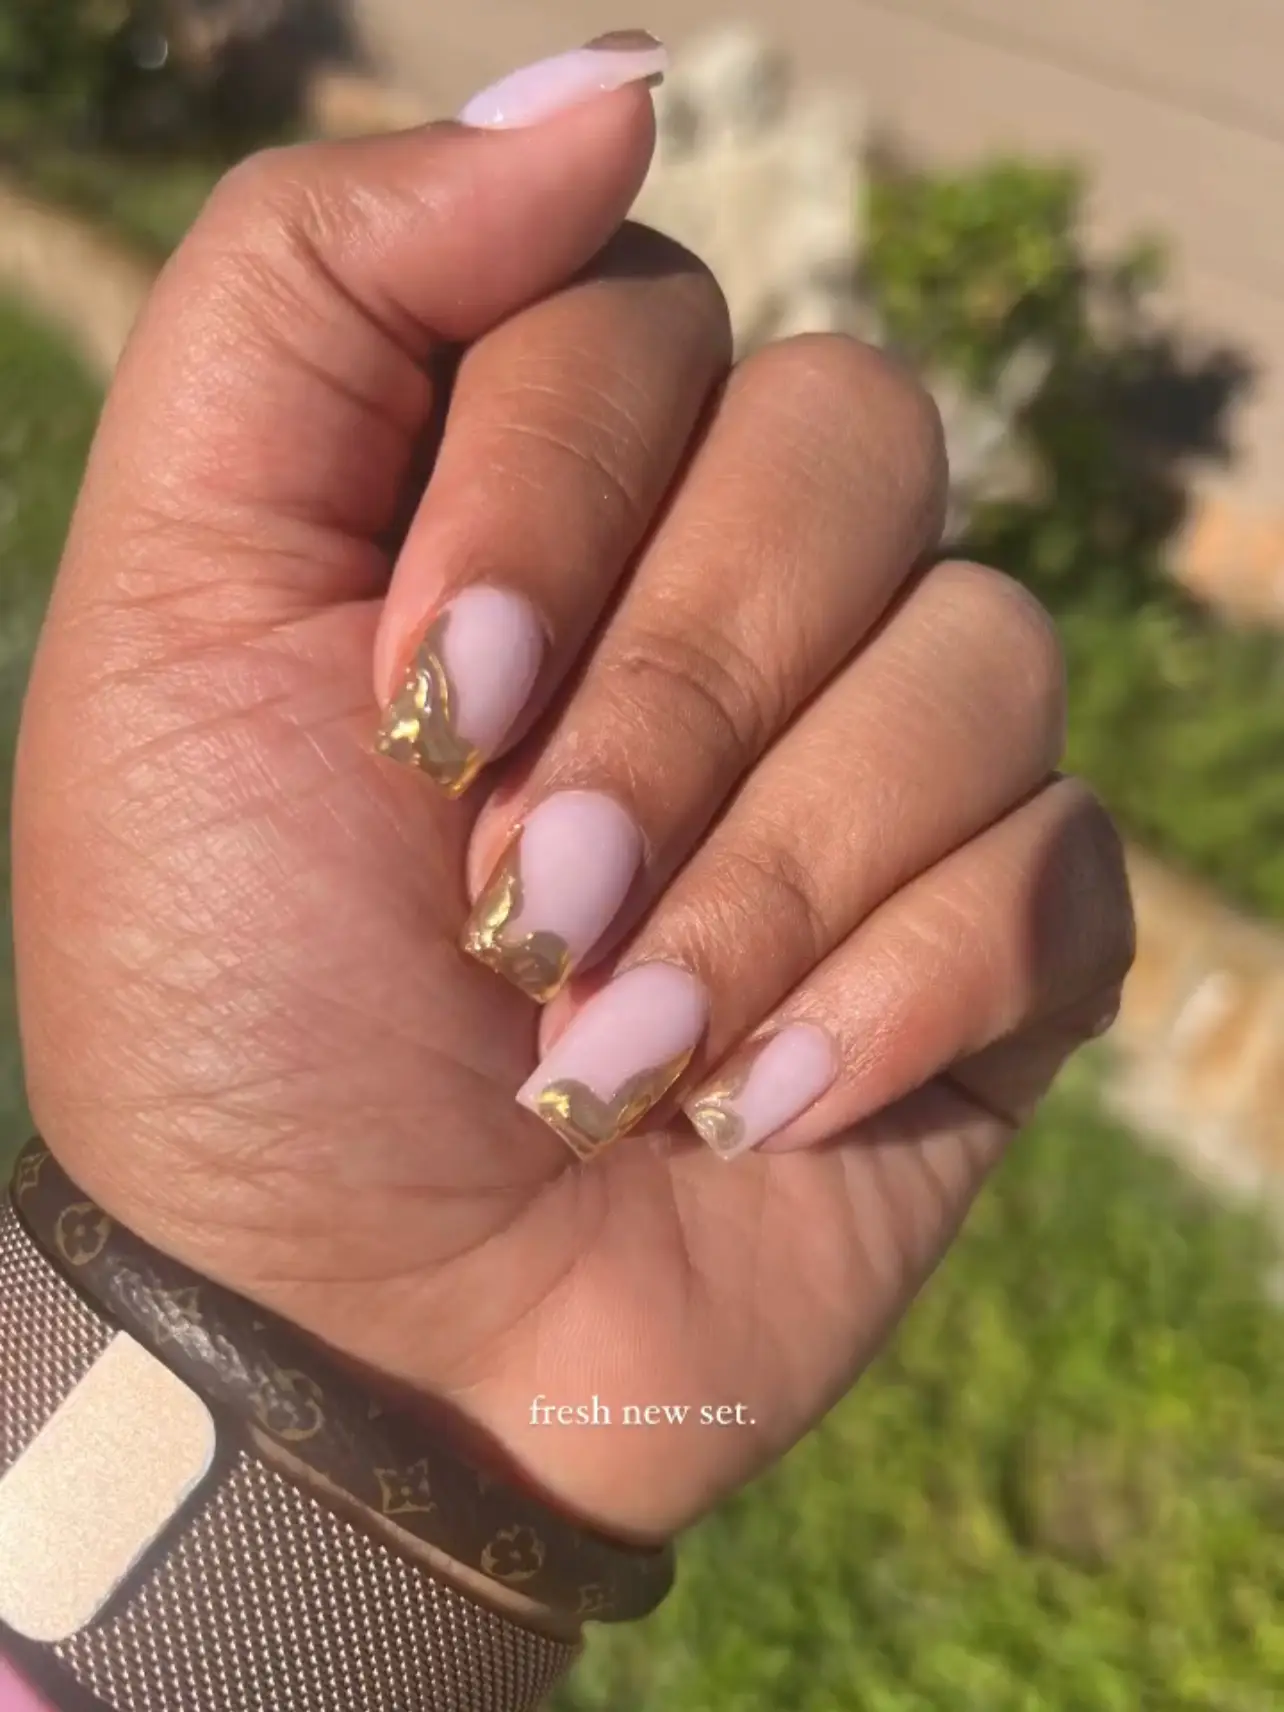 Cute Spring Nails To Inspire You : Swirl Peach & Gold Nails